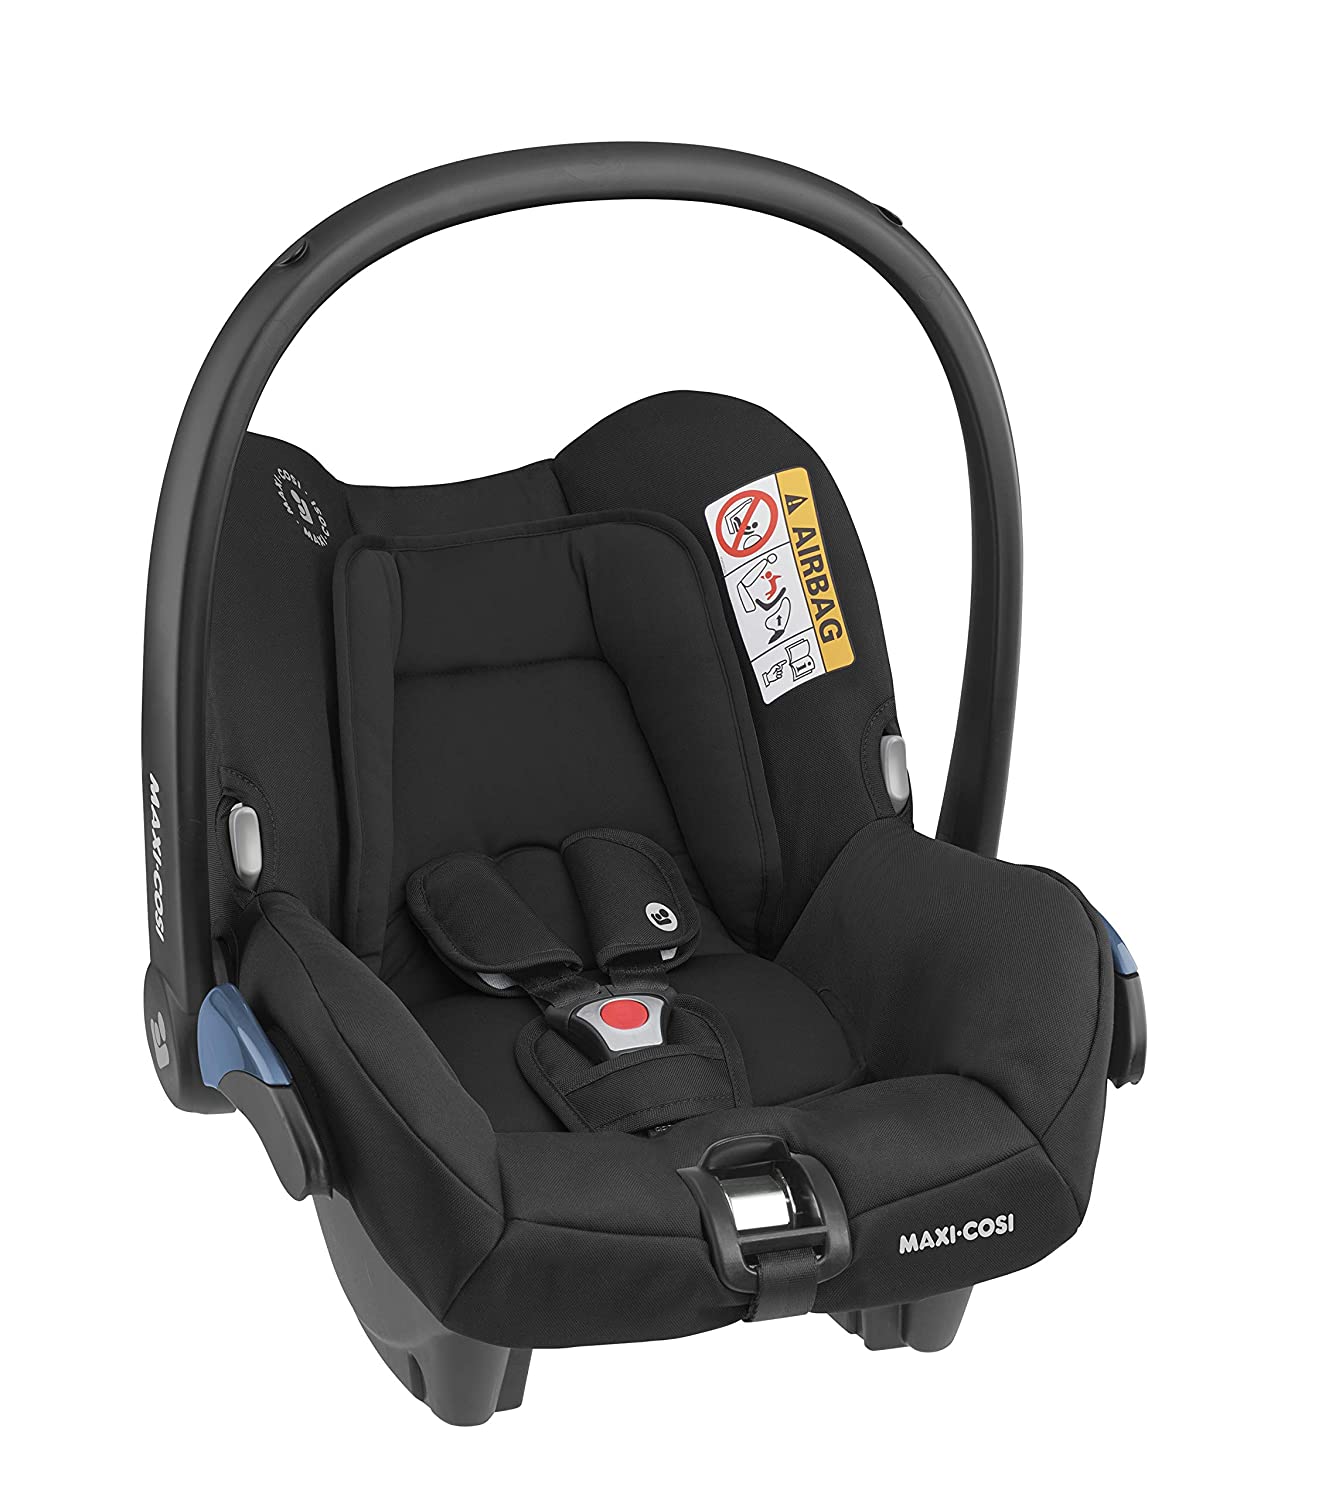 Maxi-Cosi Citi Baby Car Seat, Feather-Light Group 0+ Car Seat (0-13 kg), Can be Used from Birth to Approx. 12 Months, Essential Black, Black